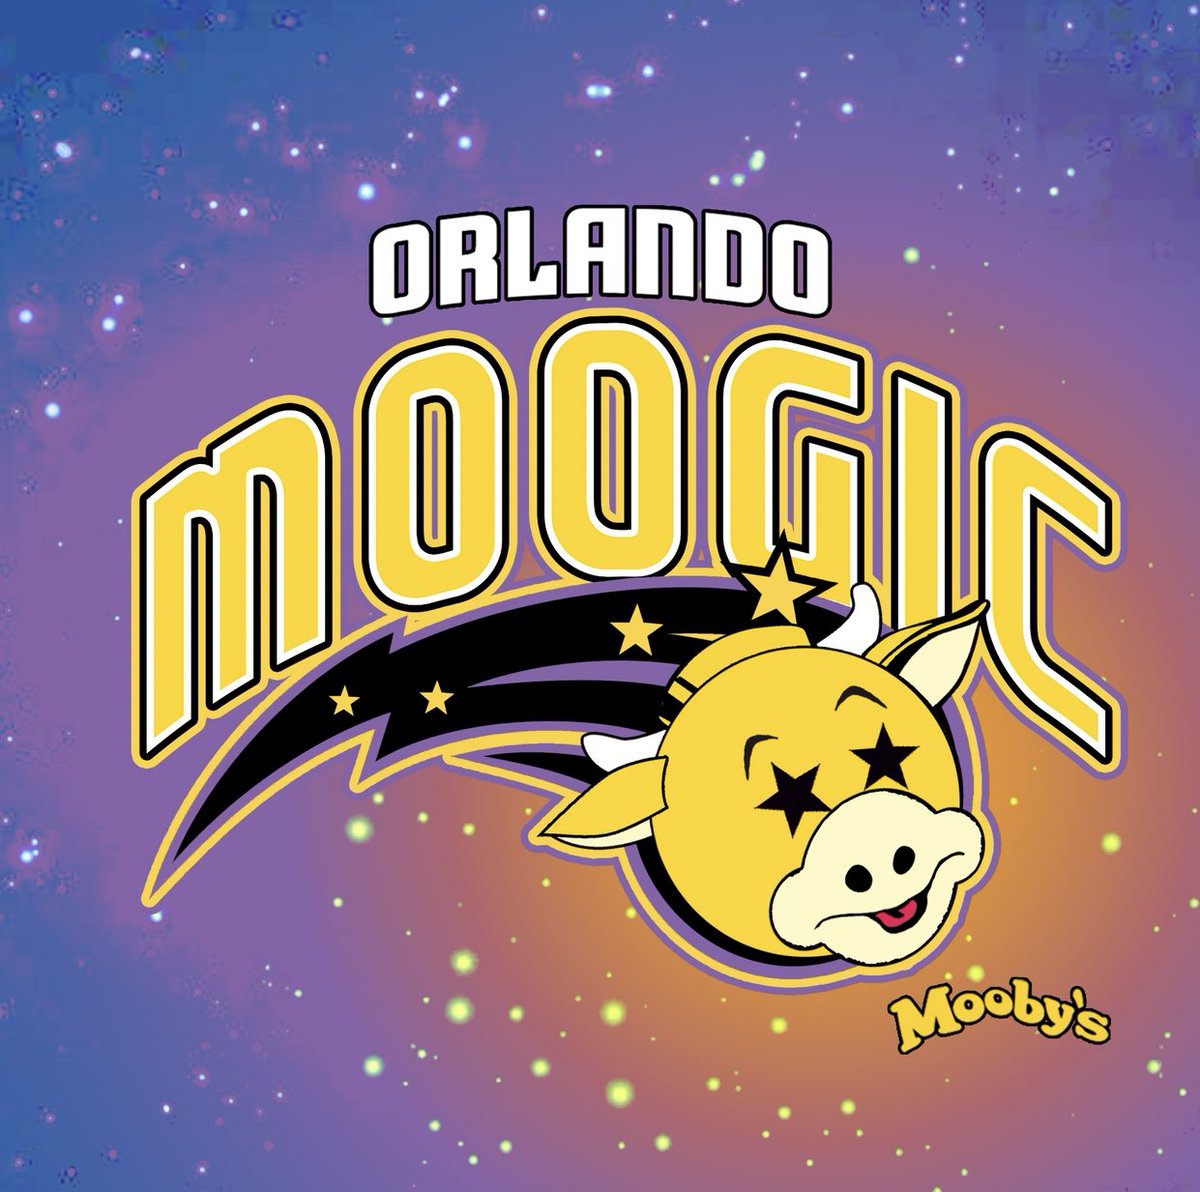 ORLANDO! The @MoobysPopUp is coming to @tinrooforlando from MARCH 12th to the 21st! And I’ll be at the Grand Opening with my Mom (who’ll cut the ribbon)! Wanna join us for safe, socially-distanced fun? Reservations open on THURSDAY at MoobysPopUp.com!